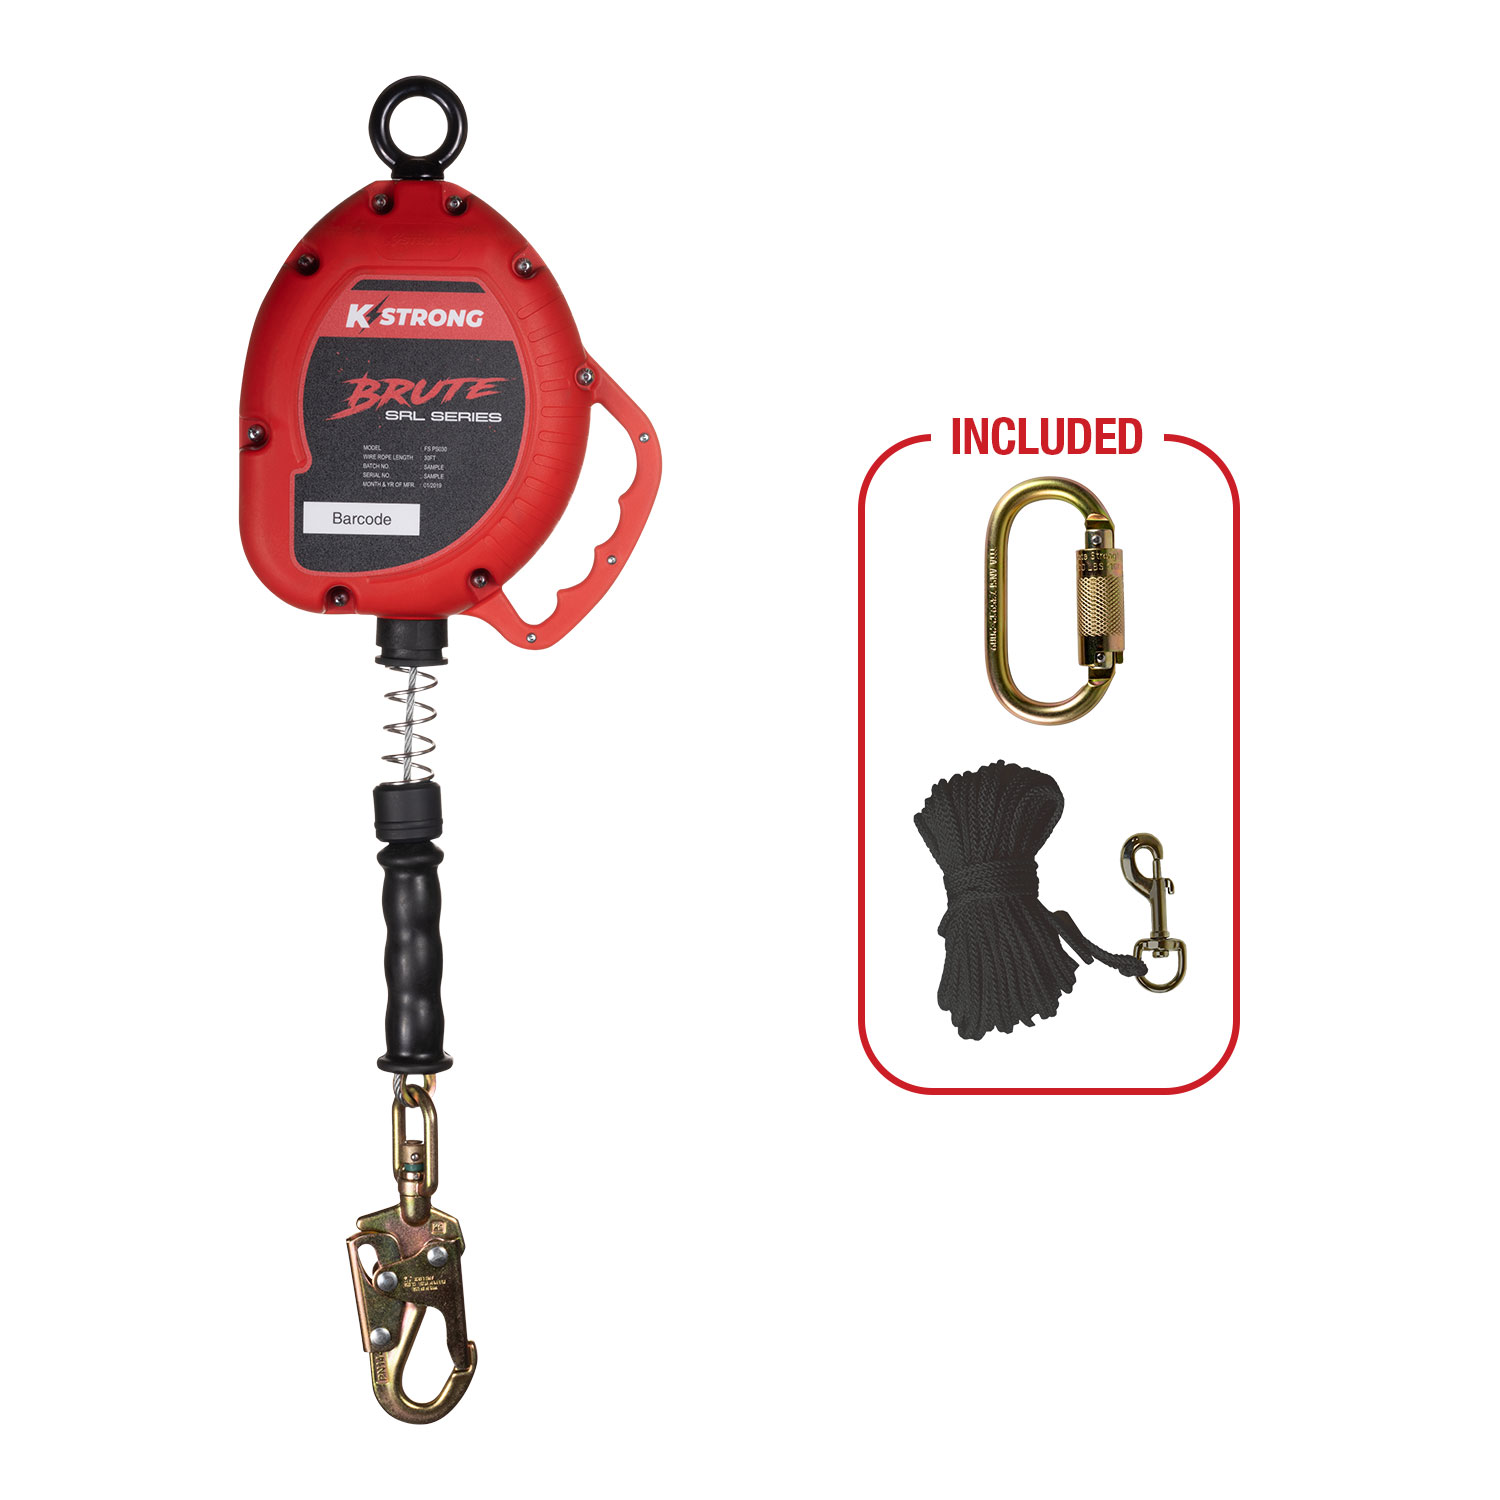 KStrong BRUTE 30 ft. Cable SRL with Snap Hook, Includes Installation Carabiner and Tagline (ANSI), UFS310030 - Click Image to Close